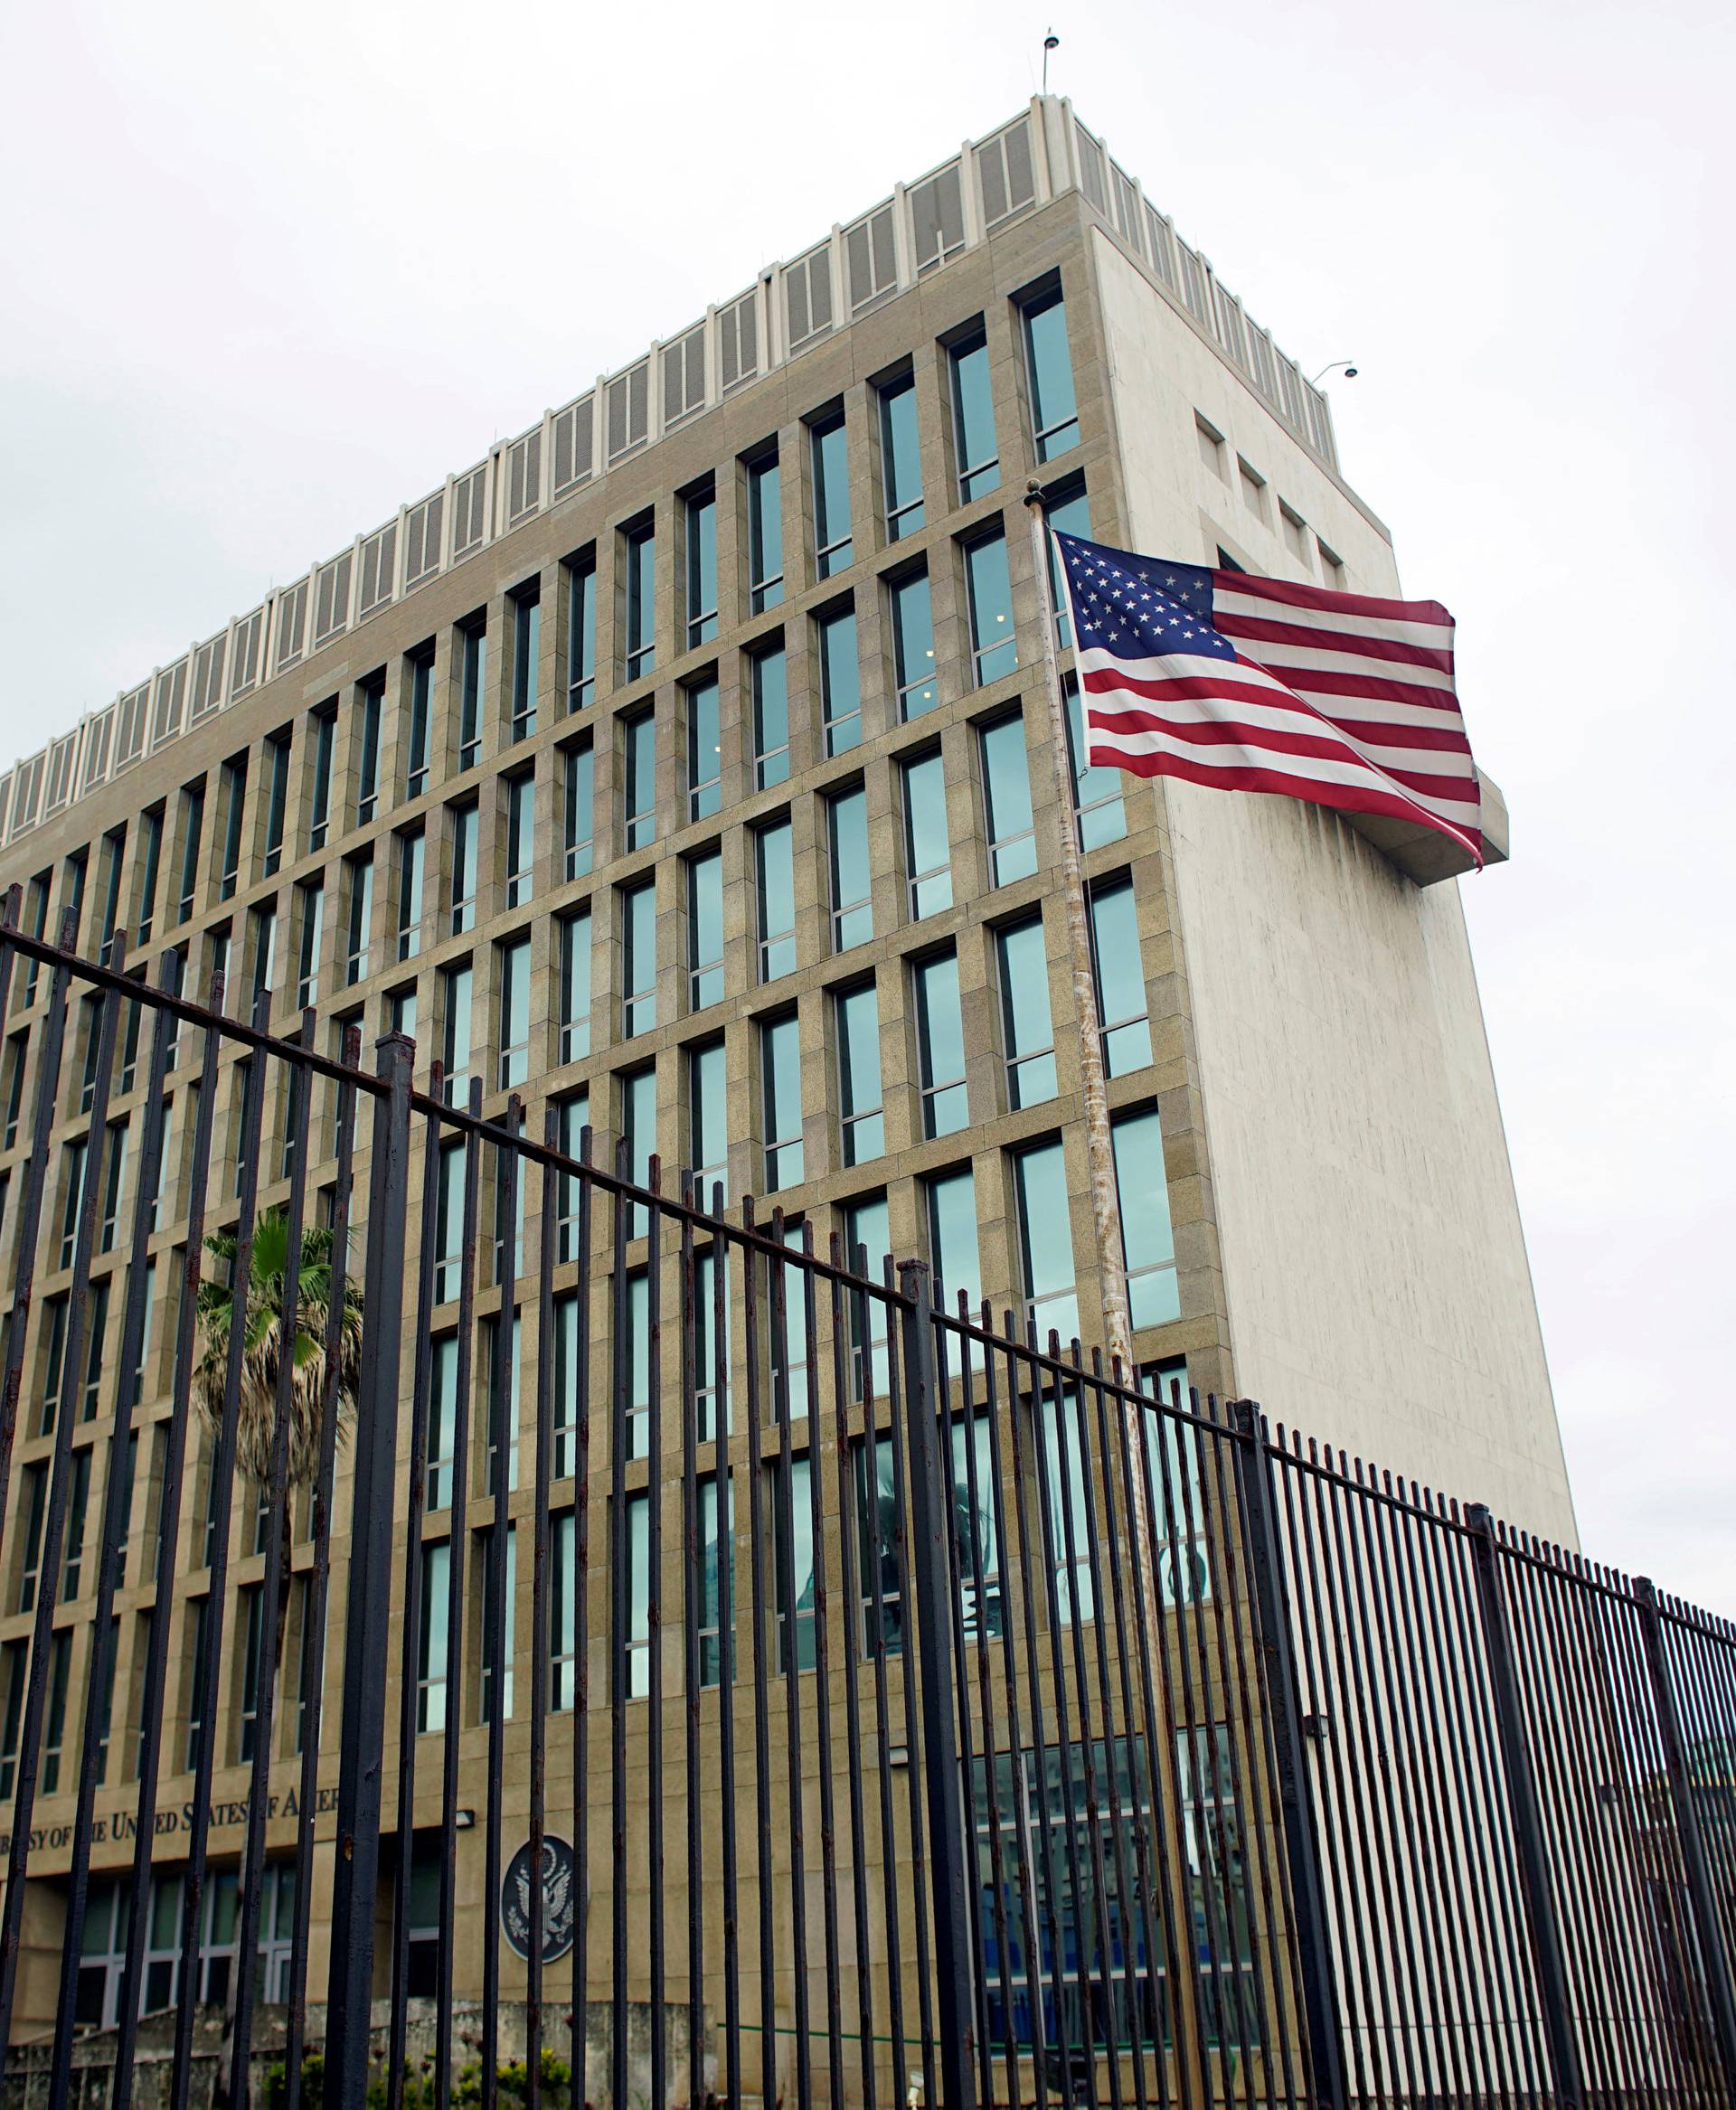 FILE PHOTO: An exterior view of the U.S. Embassy is seen in Havana, Cuba